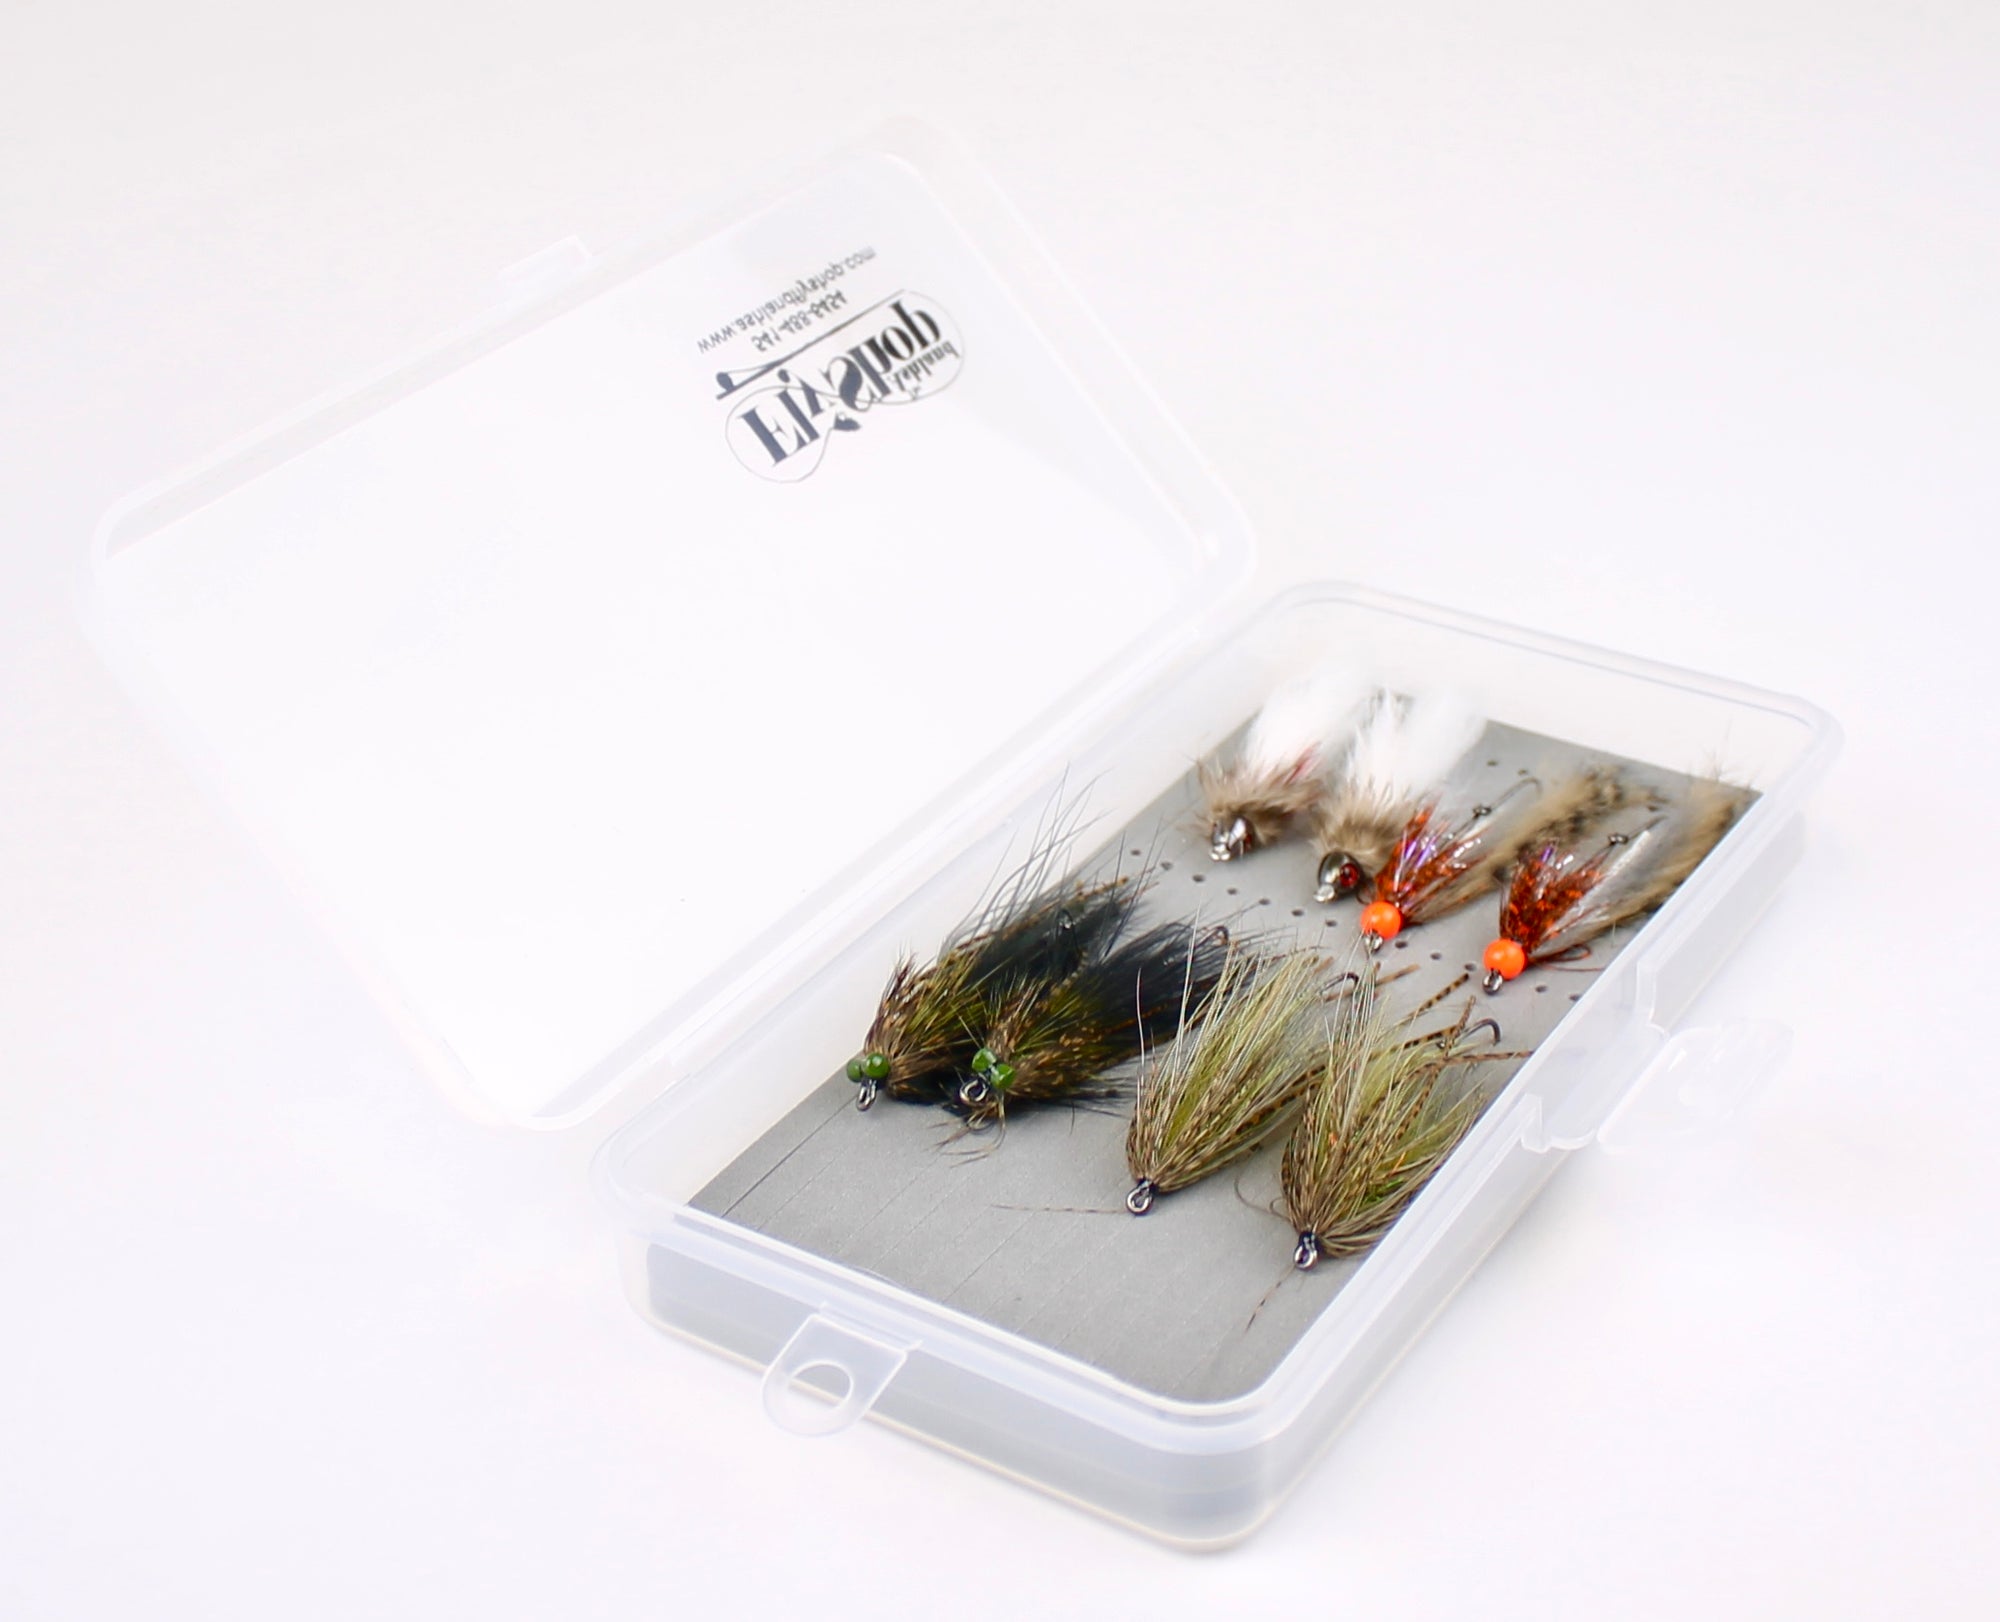 Trout Spey Fly Selection - Heavy Duty